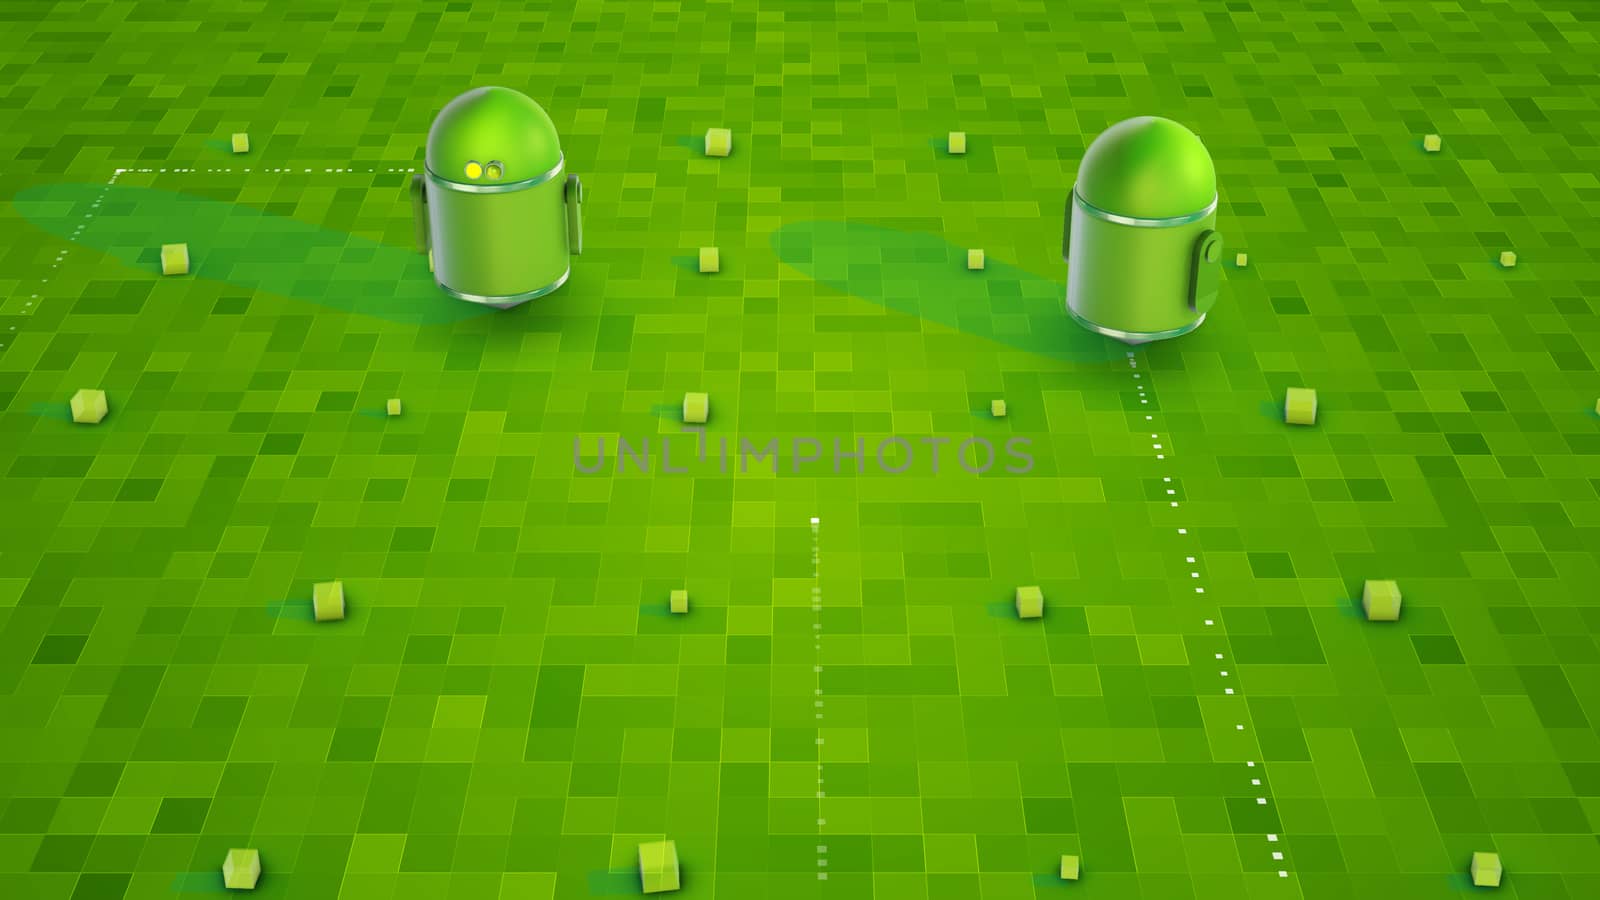 Volumetric 3d illustration of two sphere-shaped droids with yellow windows, sparkling beams standing on the light green surface with square sensors.